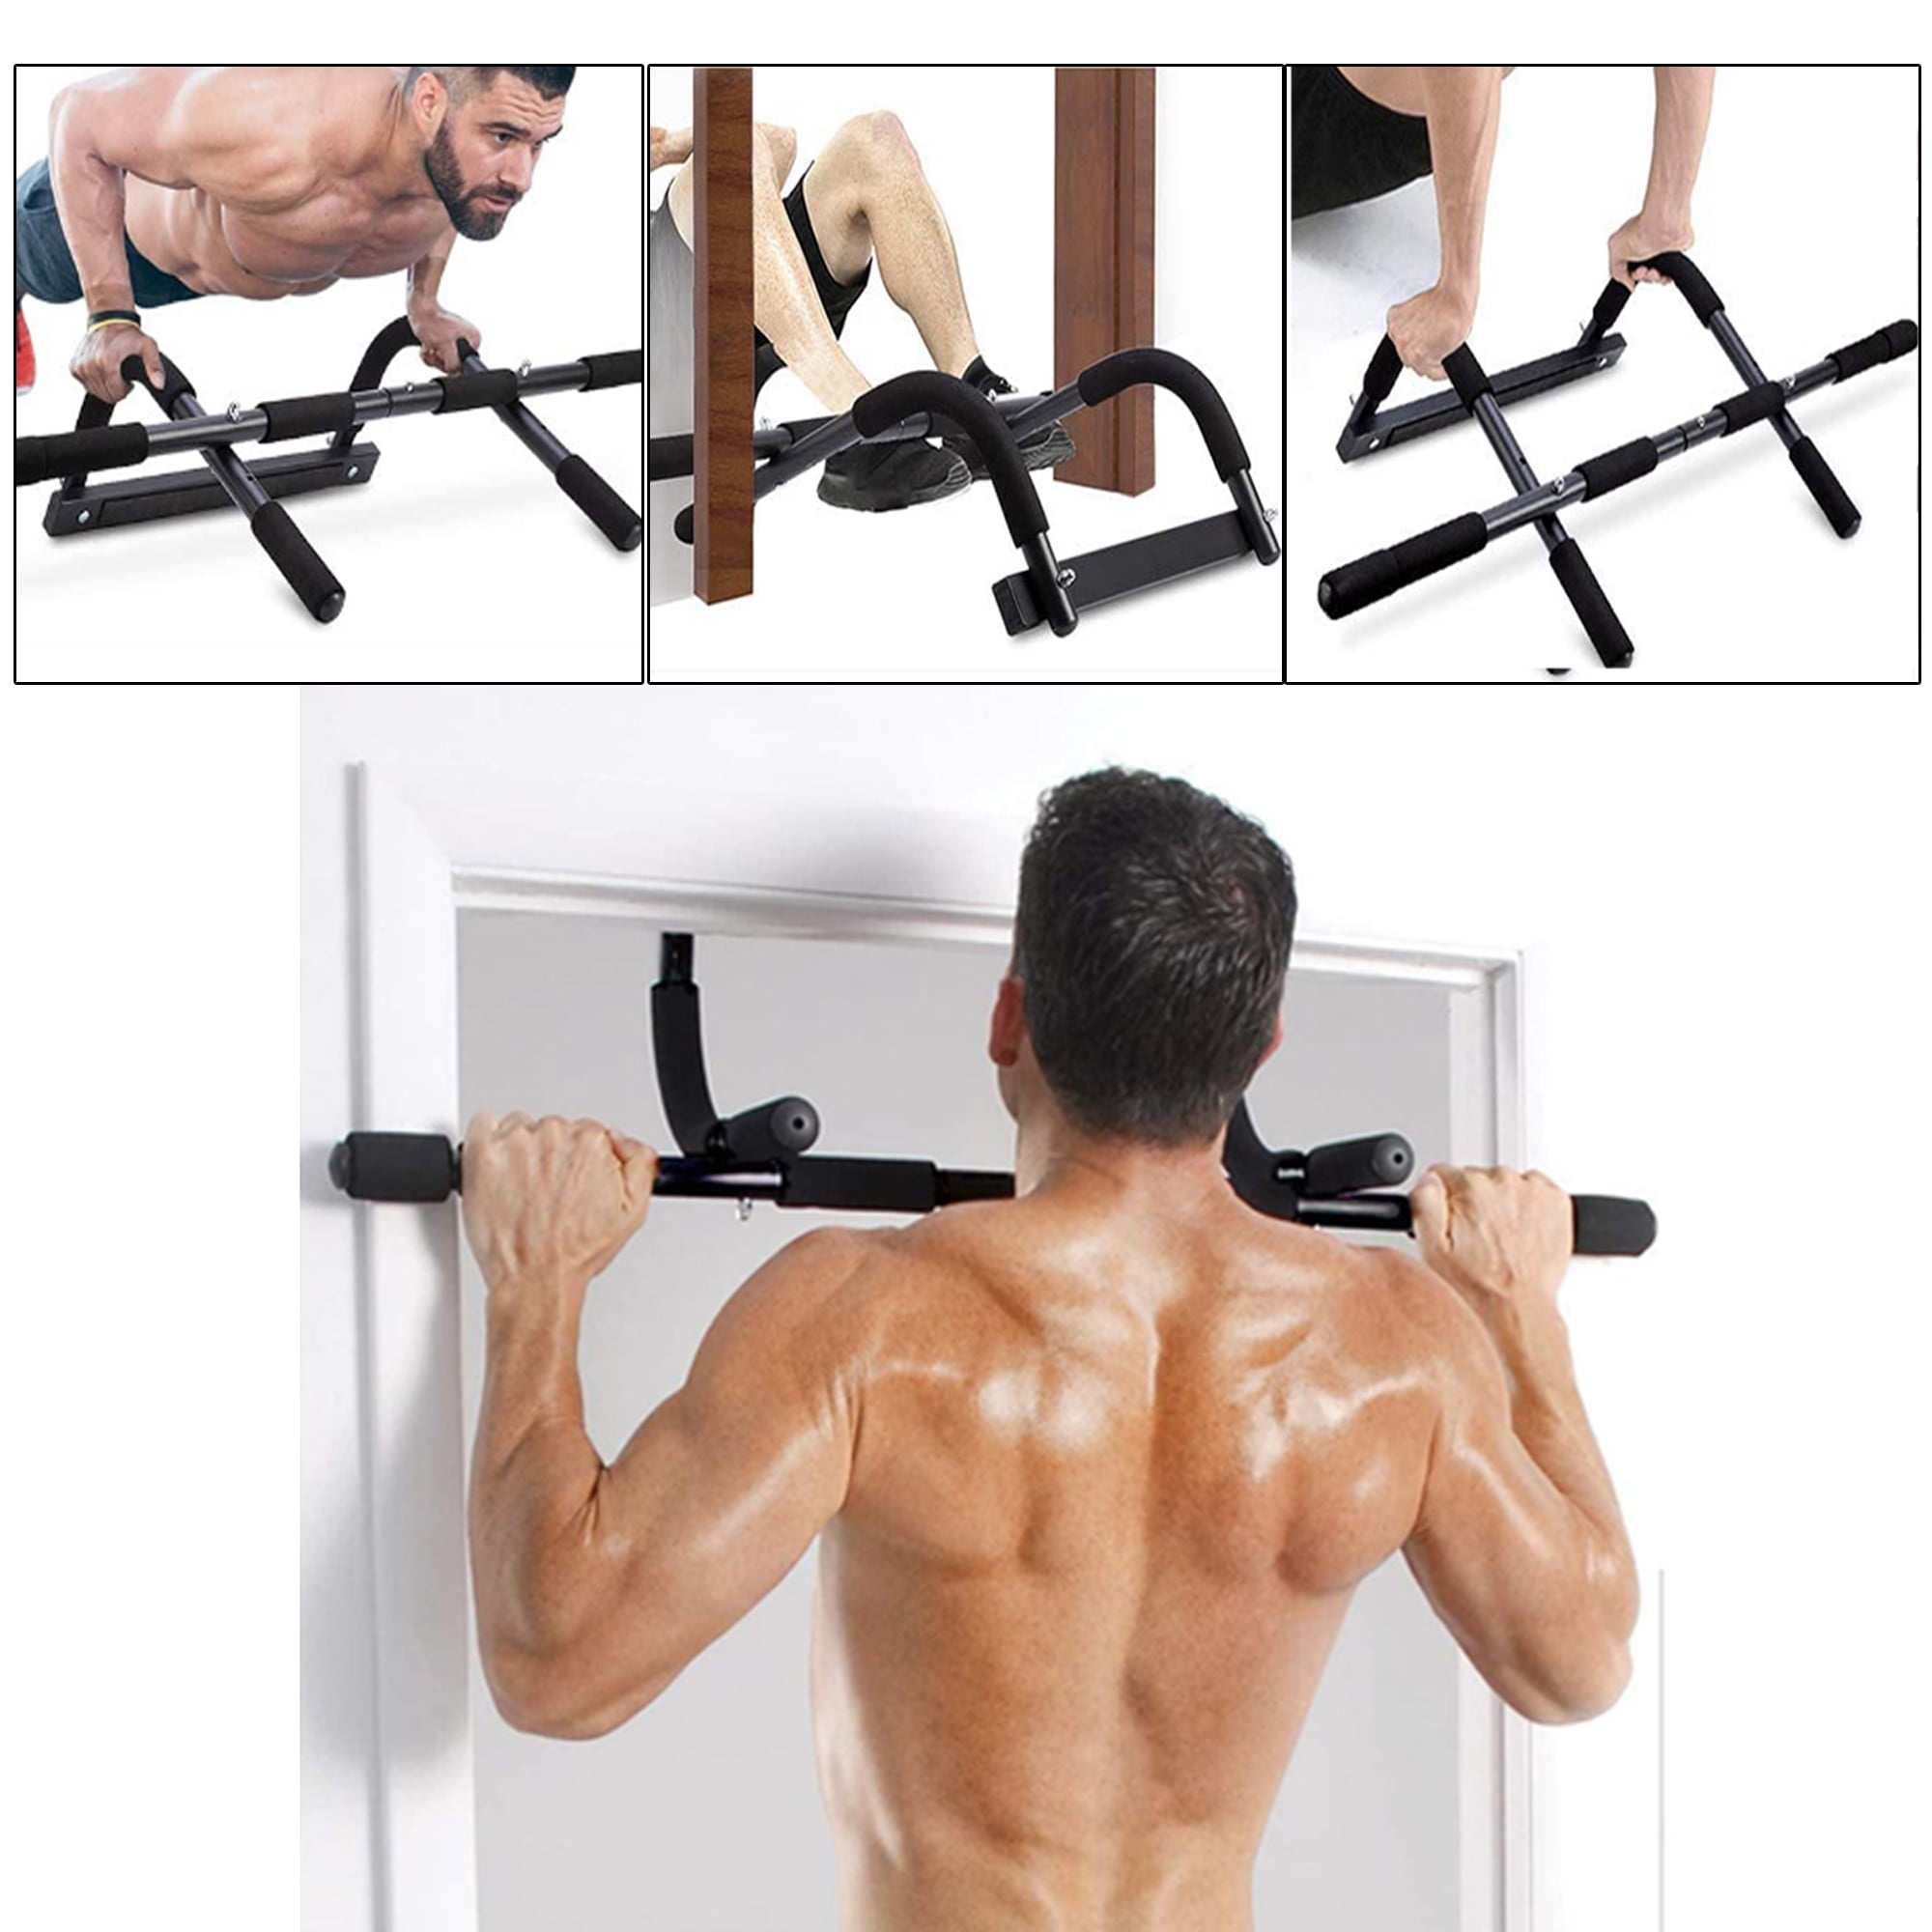 Pull Up Door Bar Fitness Horizontal Indoor Home Gym Upper Body Exercise Workout